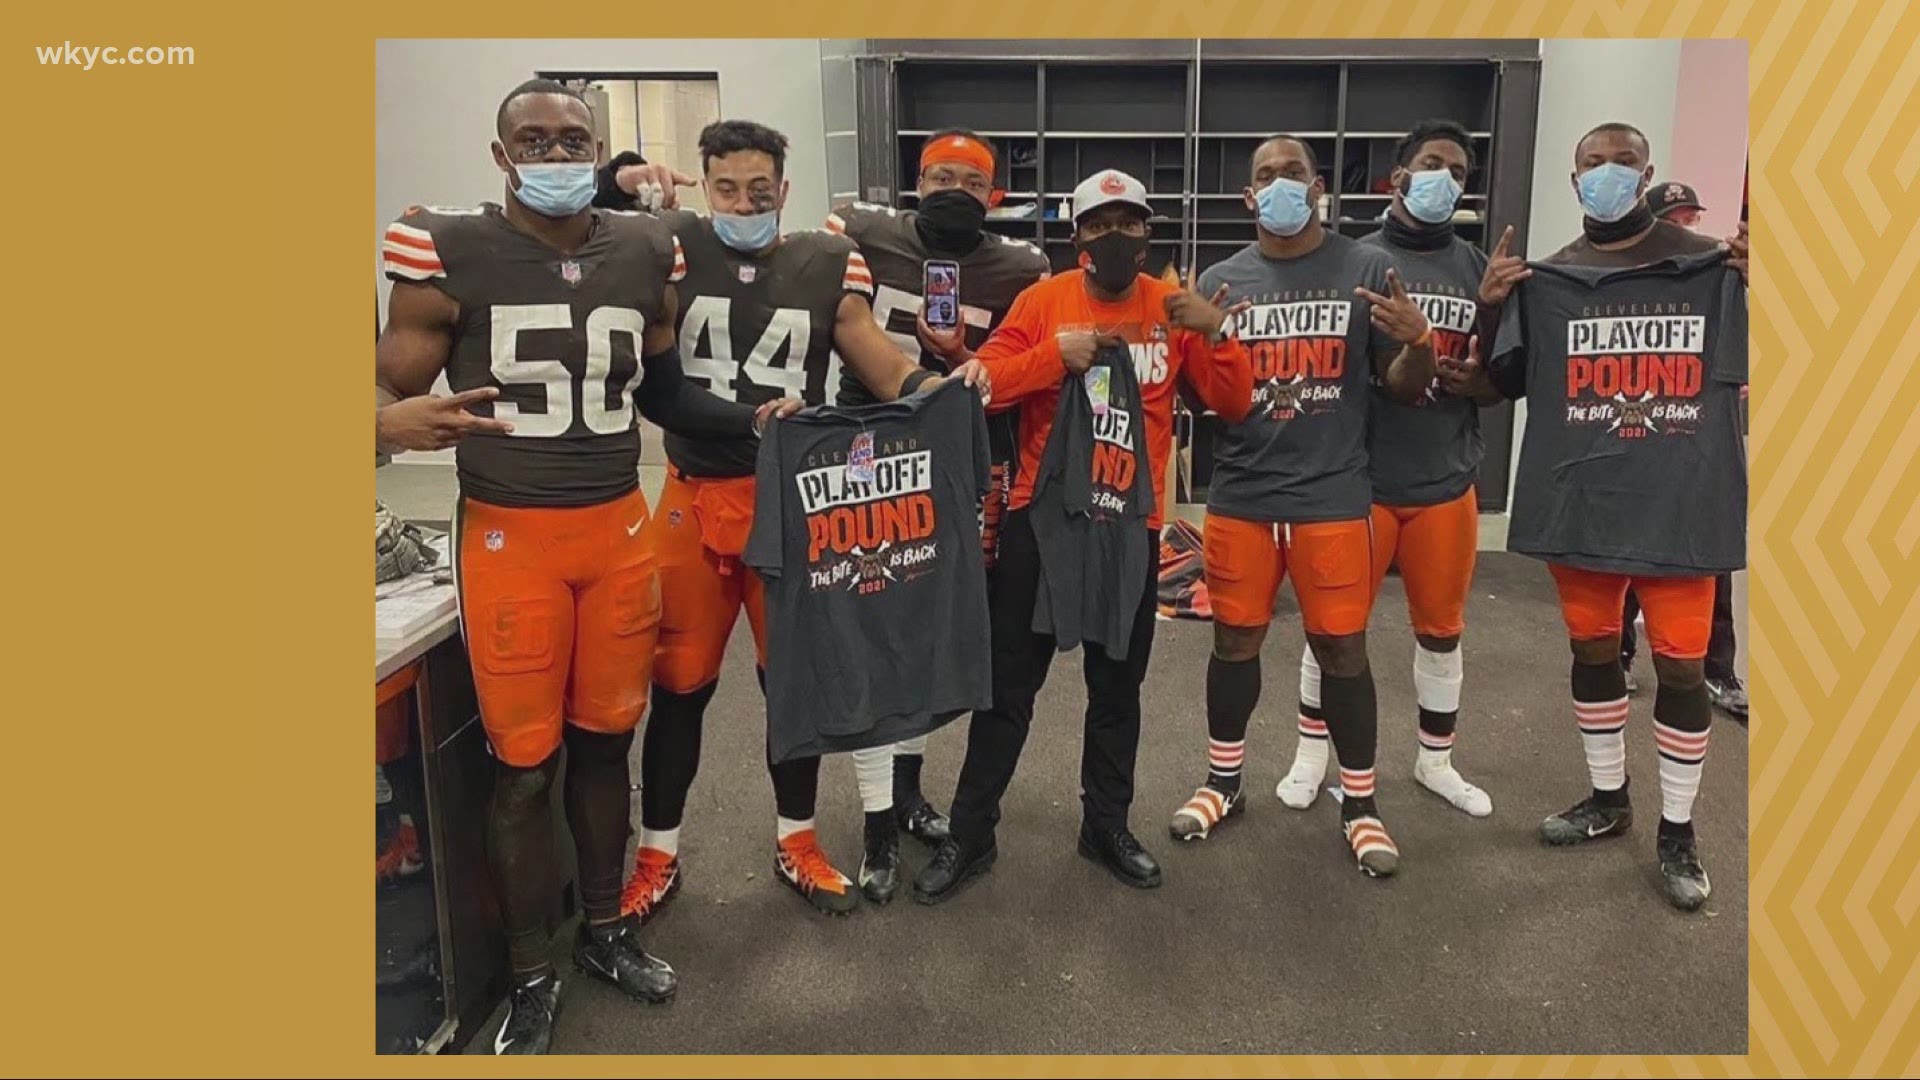 Since the Browns are going to the playoffs, we  have to get some new swag to celebrate with. Romney Smith has all the details of the new playoff gear.